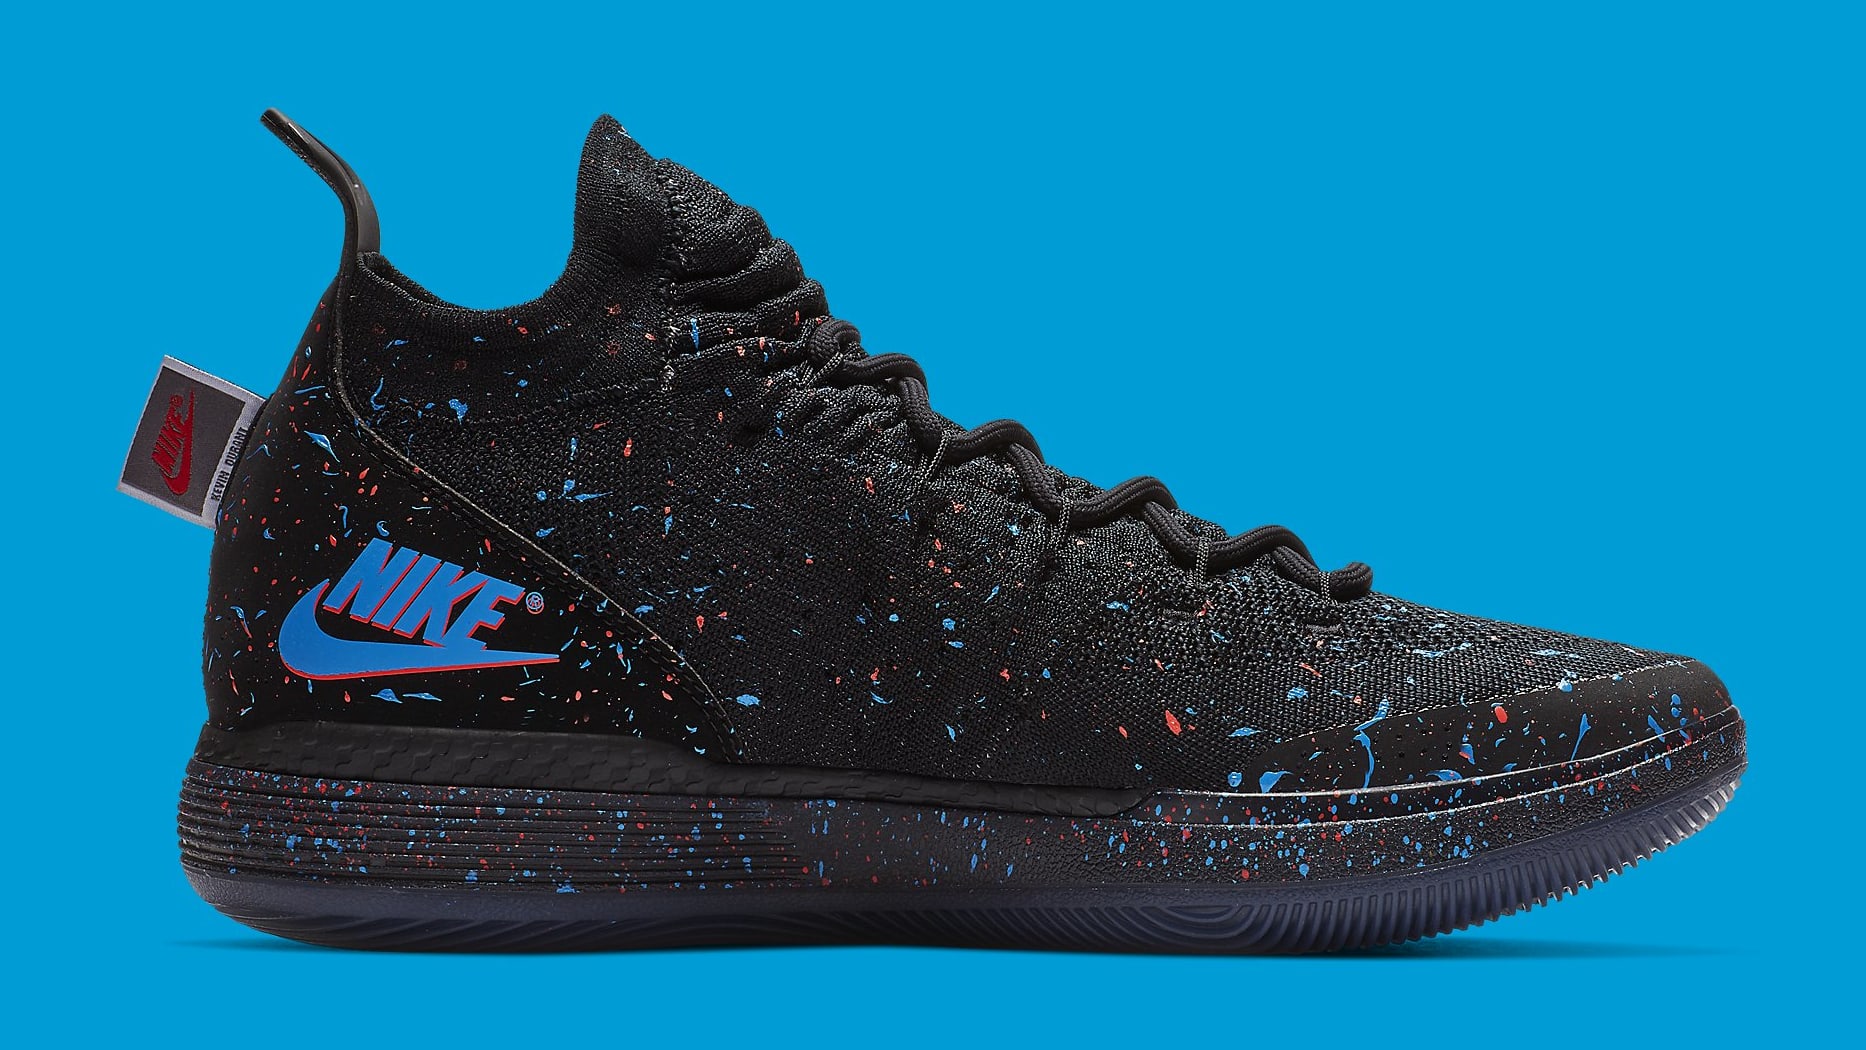 Nike KD 11 &#x27;Just Do It&#x27; AO2604-007 Medial